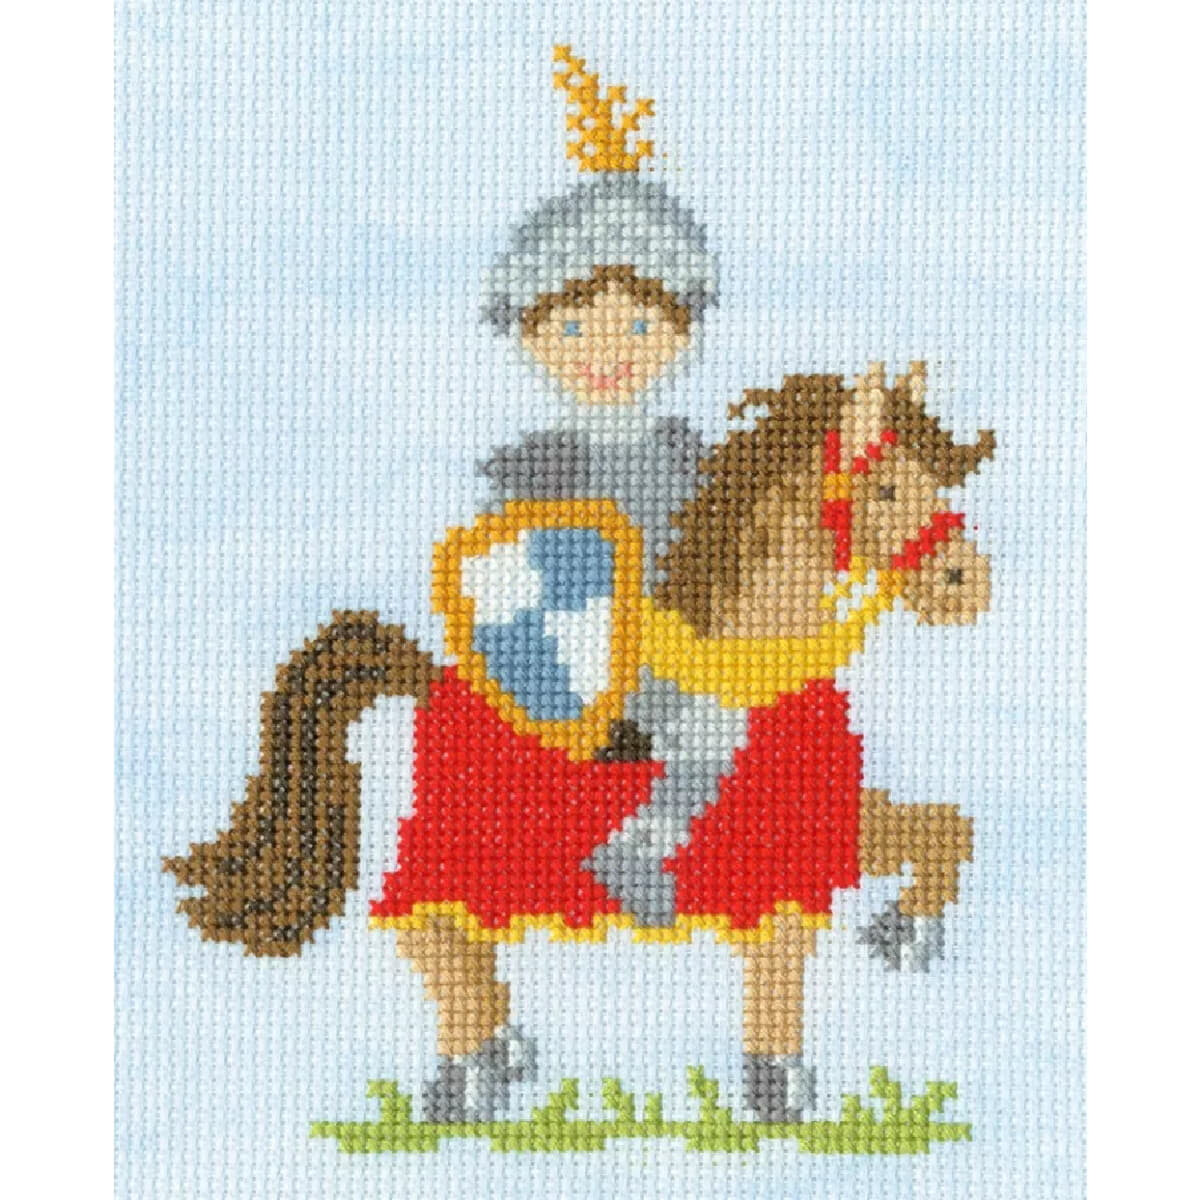 Bothy Threads counted cross stitch kit "The Knights...